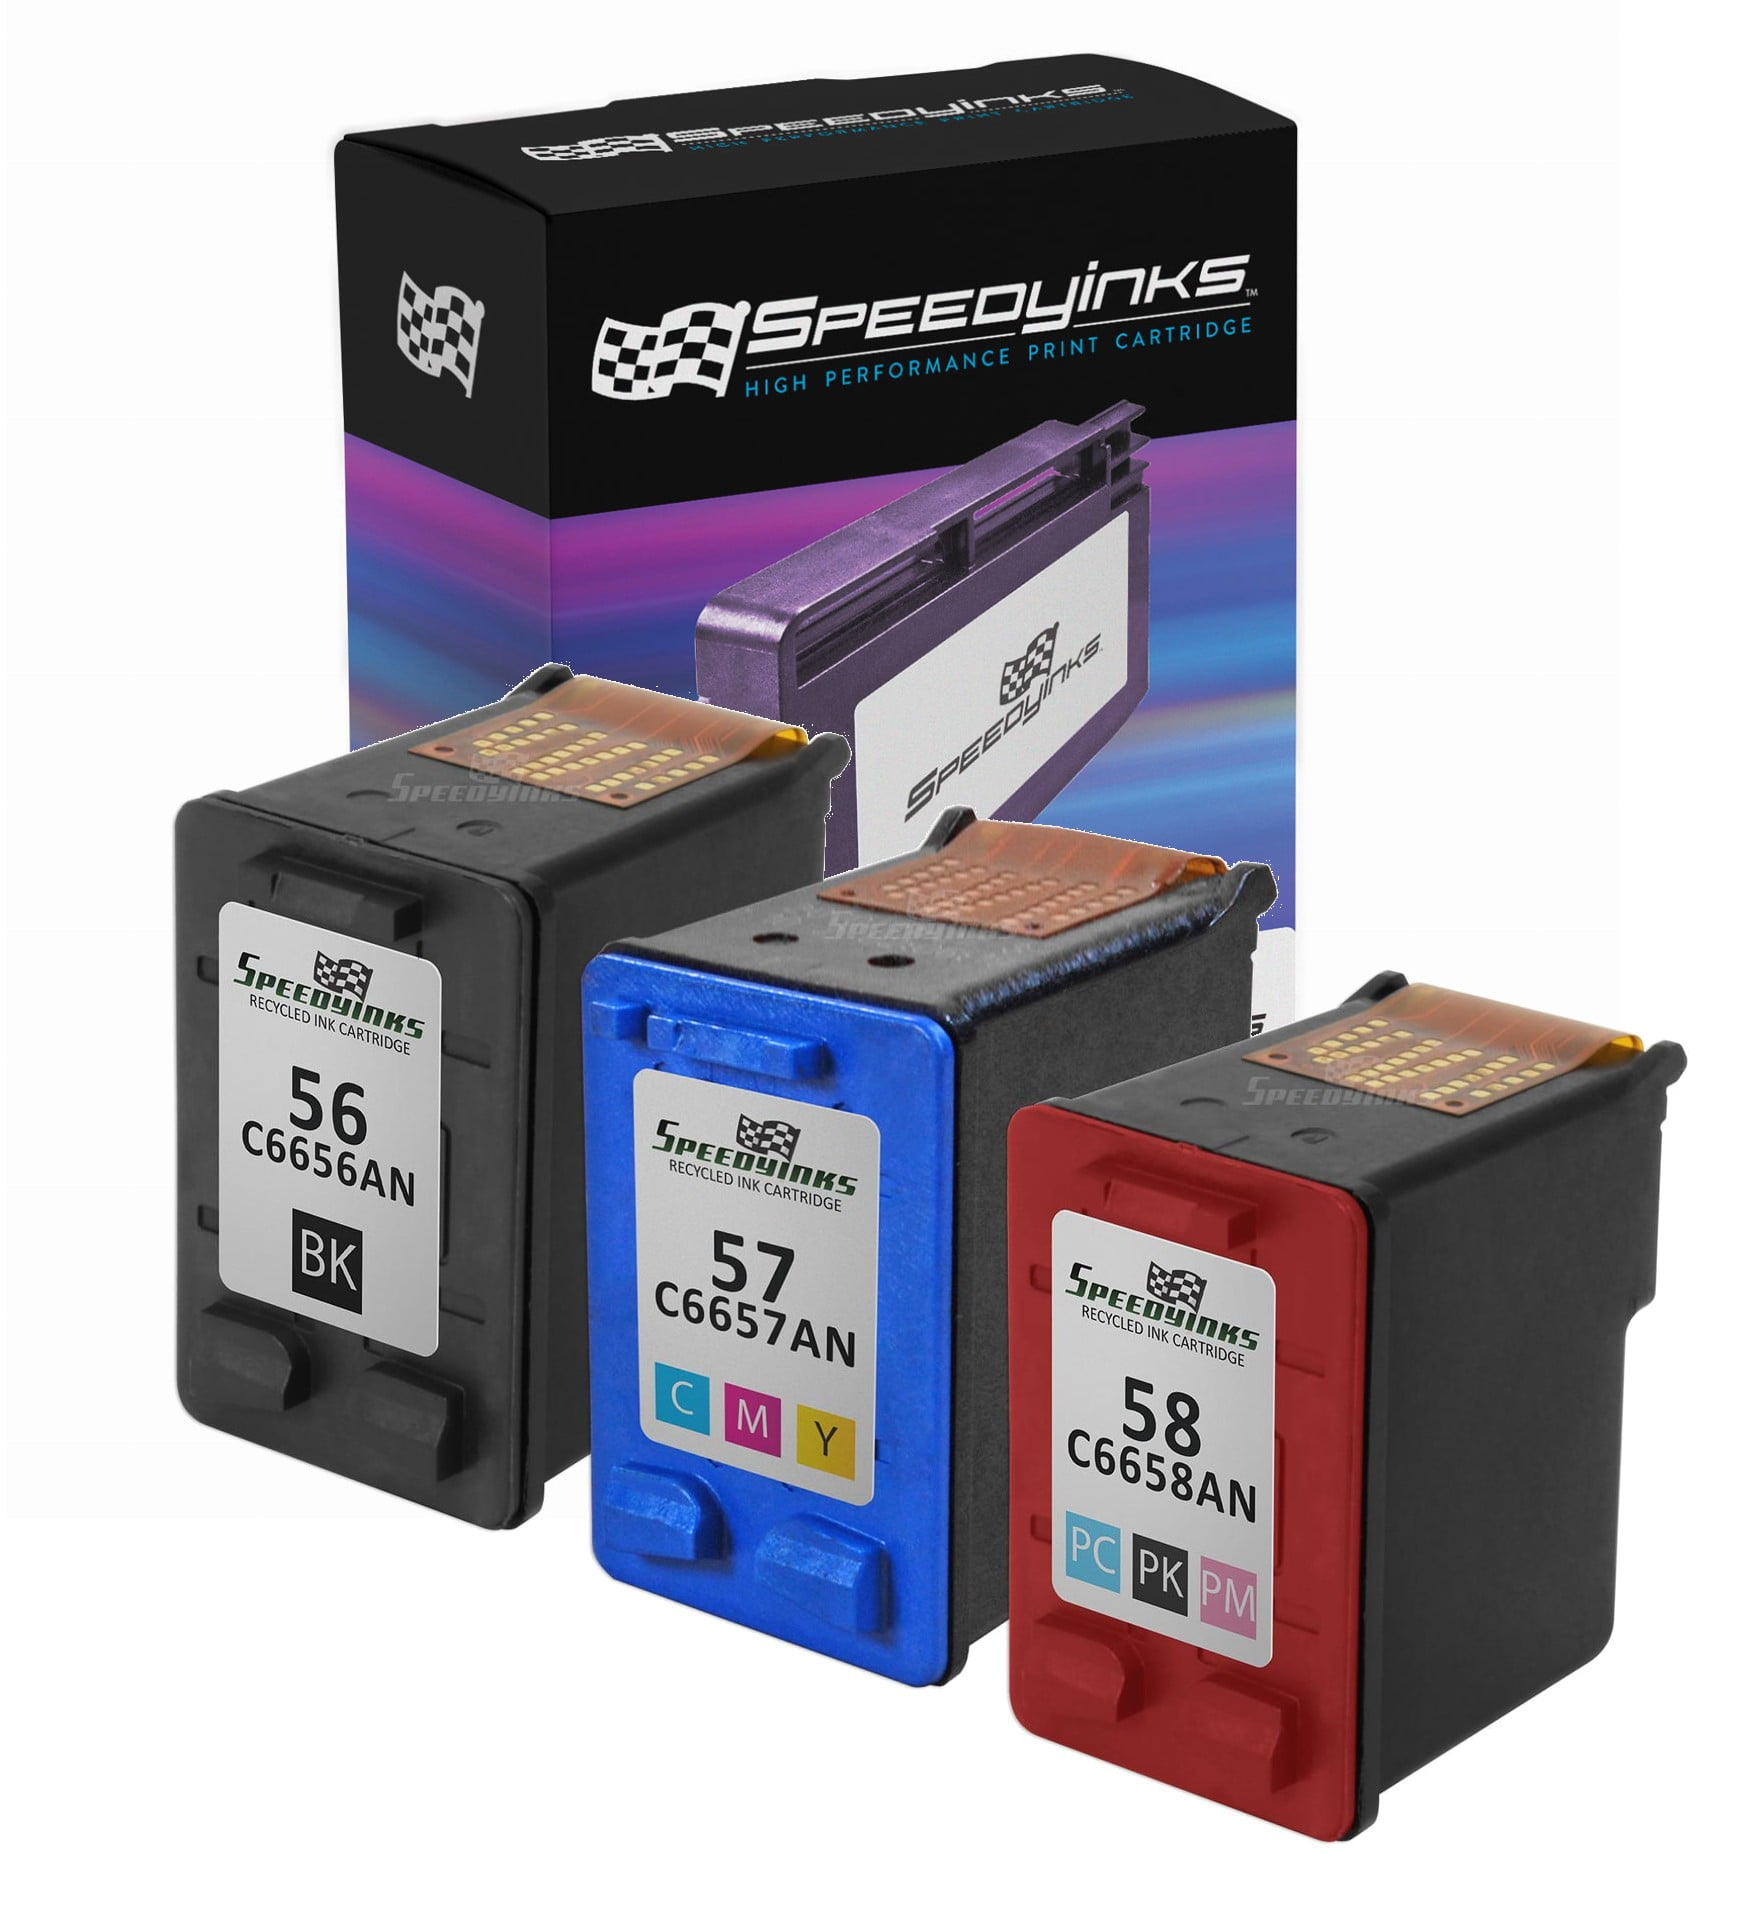 SpeedyInks 3PK Remanufactured Replacement for HP 56 HP 57 HP 58